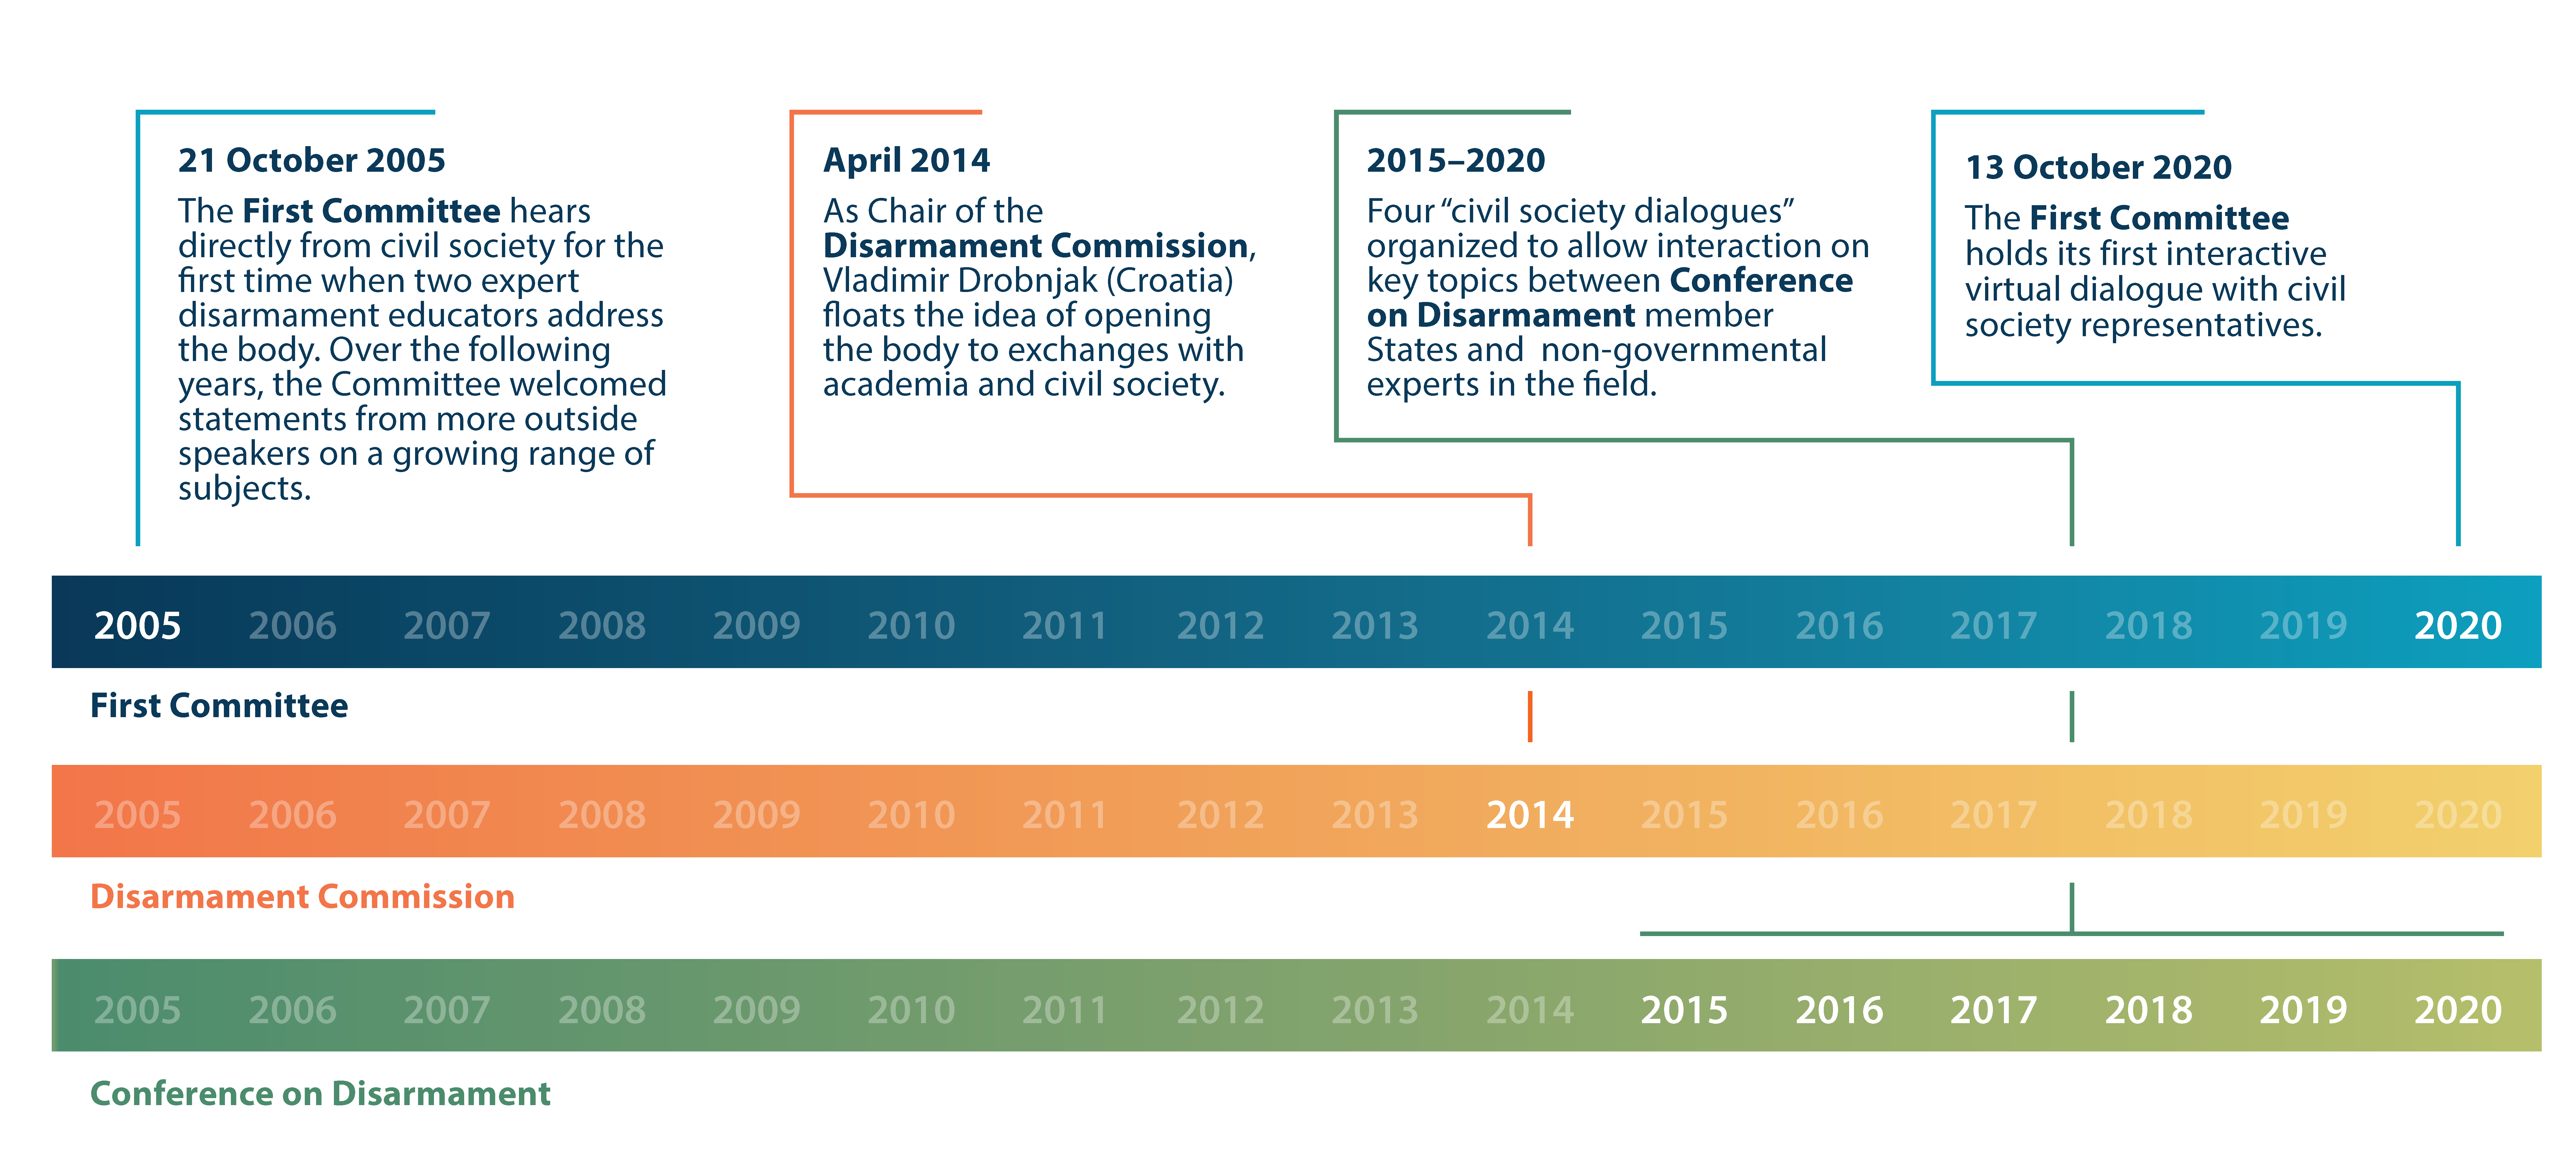 Timeline from 2005 to 2020 showing highlights of civil society participation in disarmament efforts at the First Committee, the Disarmament Commission and the Conference on Disarmament